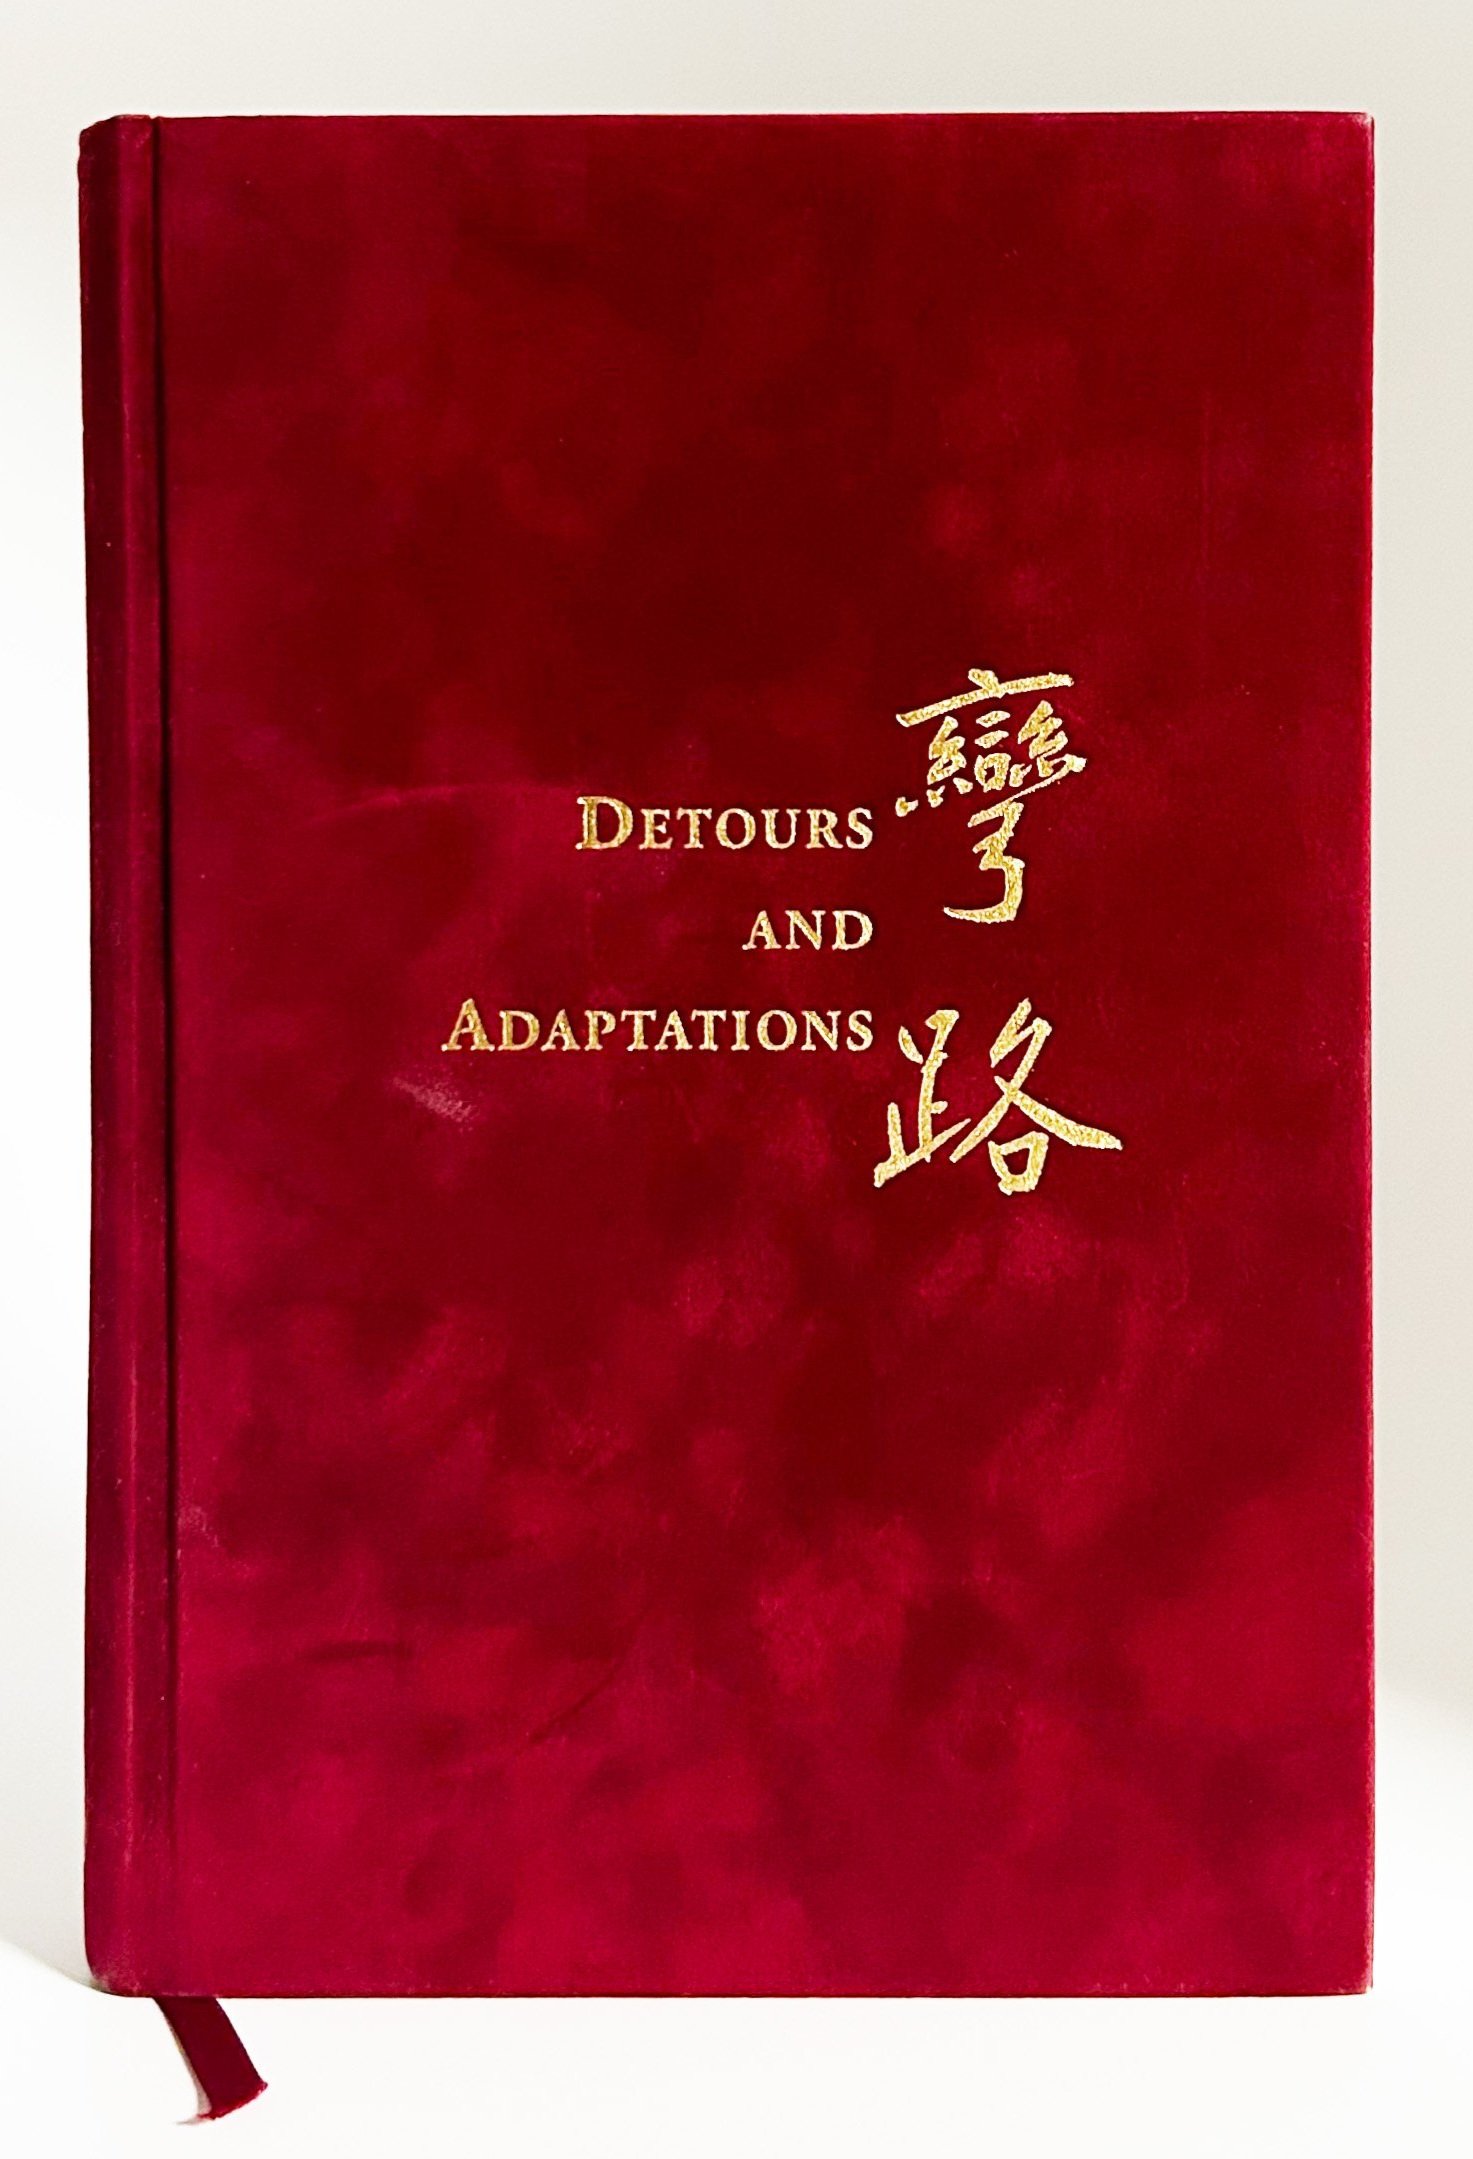 Detours and Adaptations (2001)